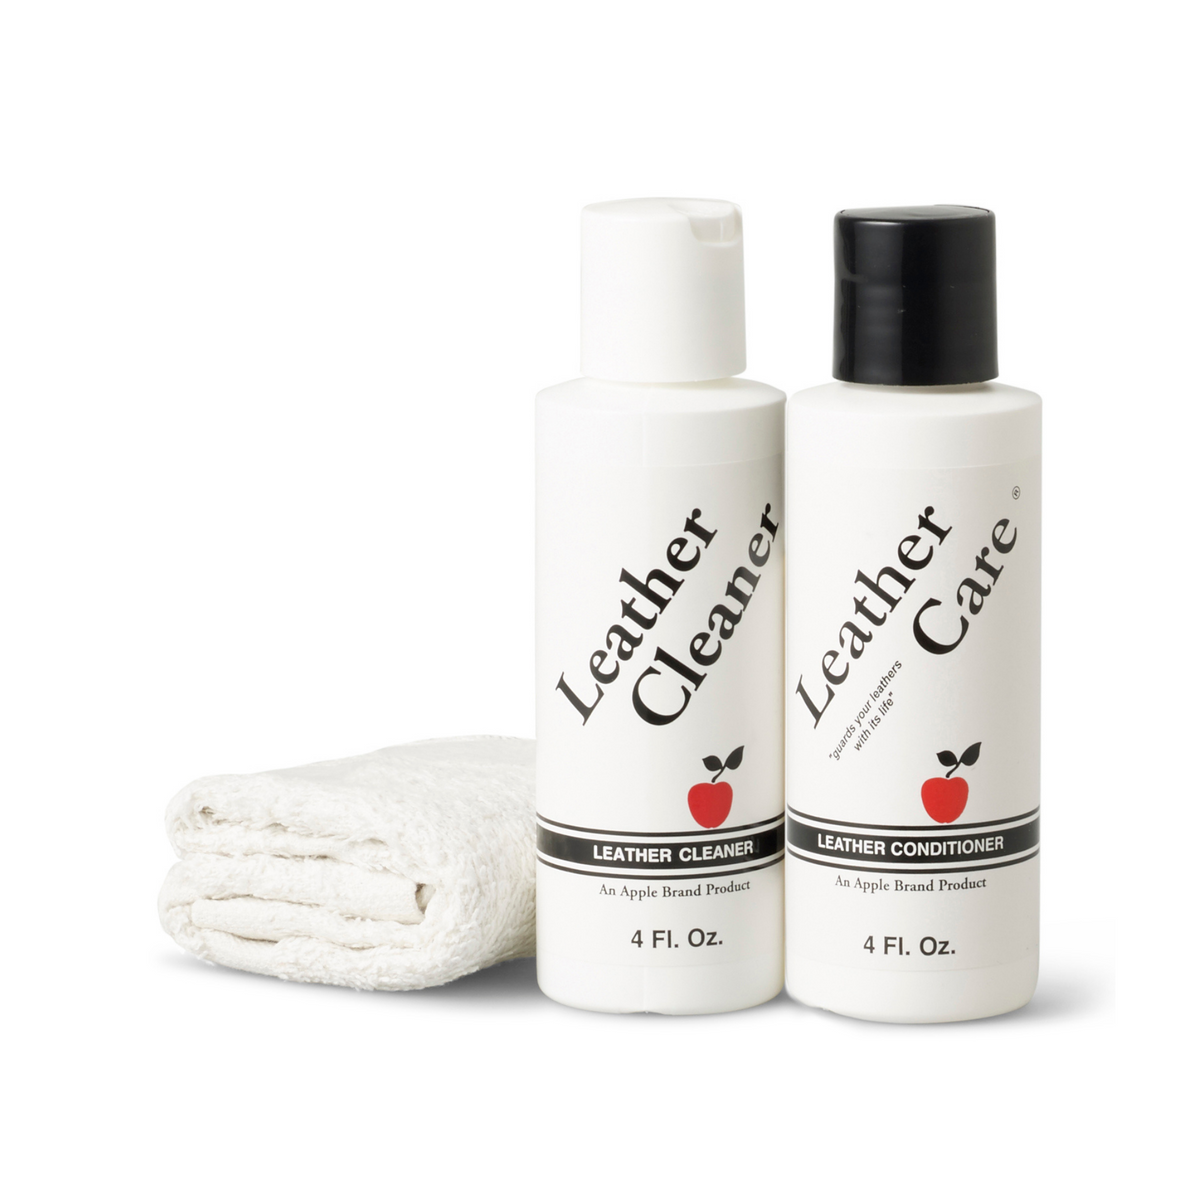 Apple brand leather care Kit for ladies hand bags